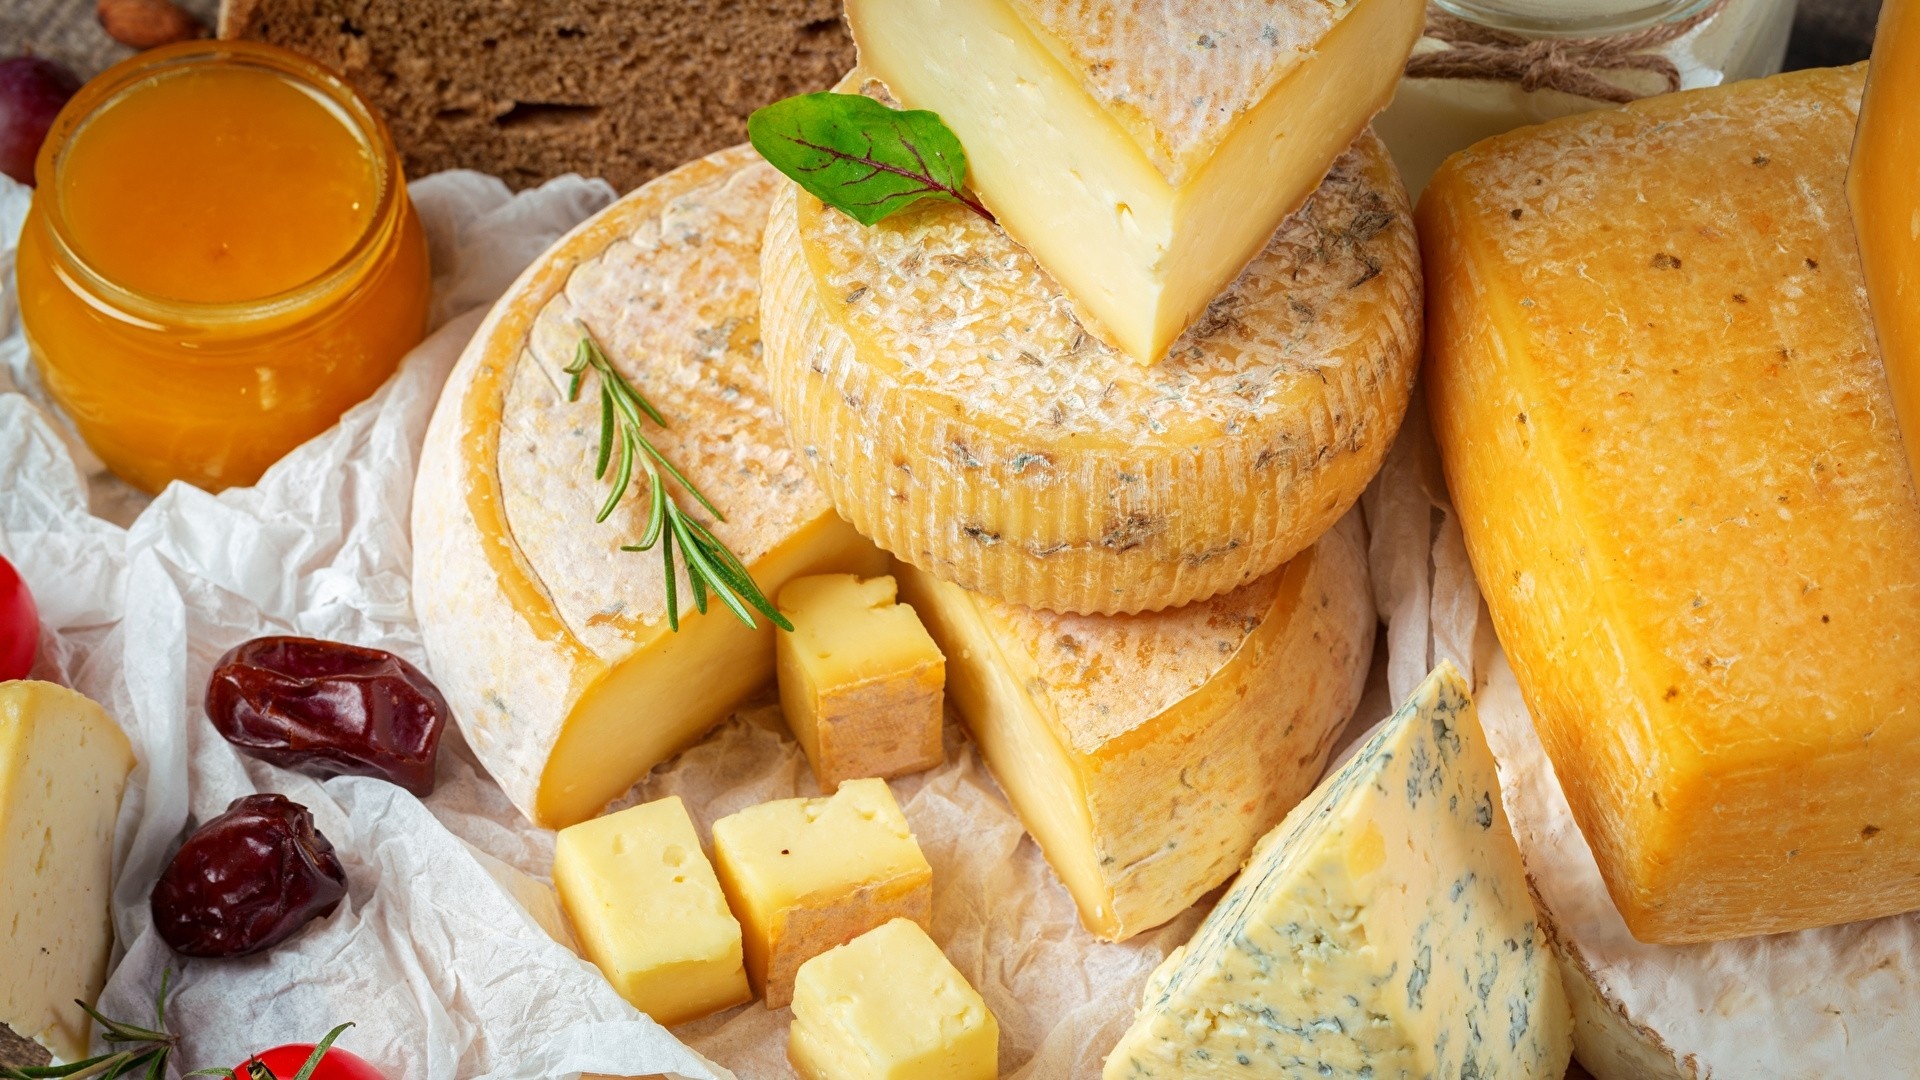 Cheese: Coated in wax or natural rinds to protect during aging and storage. 1920x1080 Full HD Background.